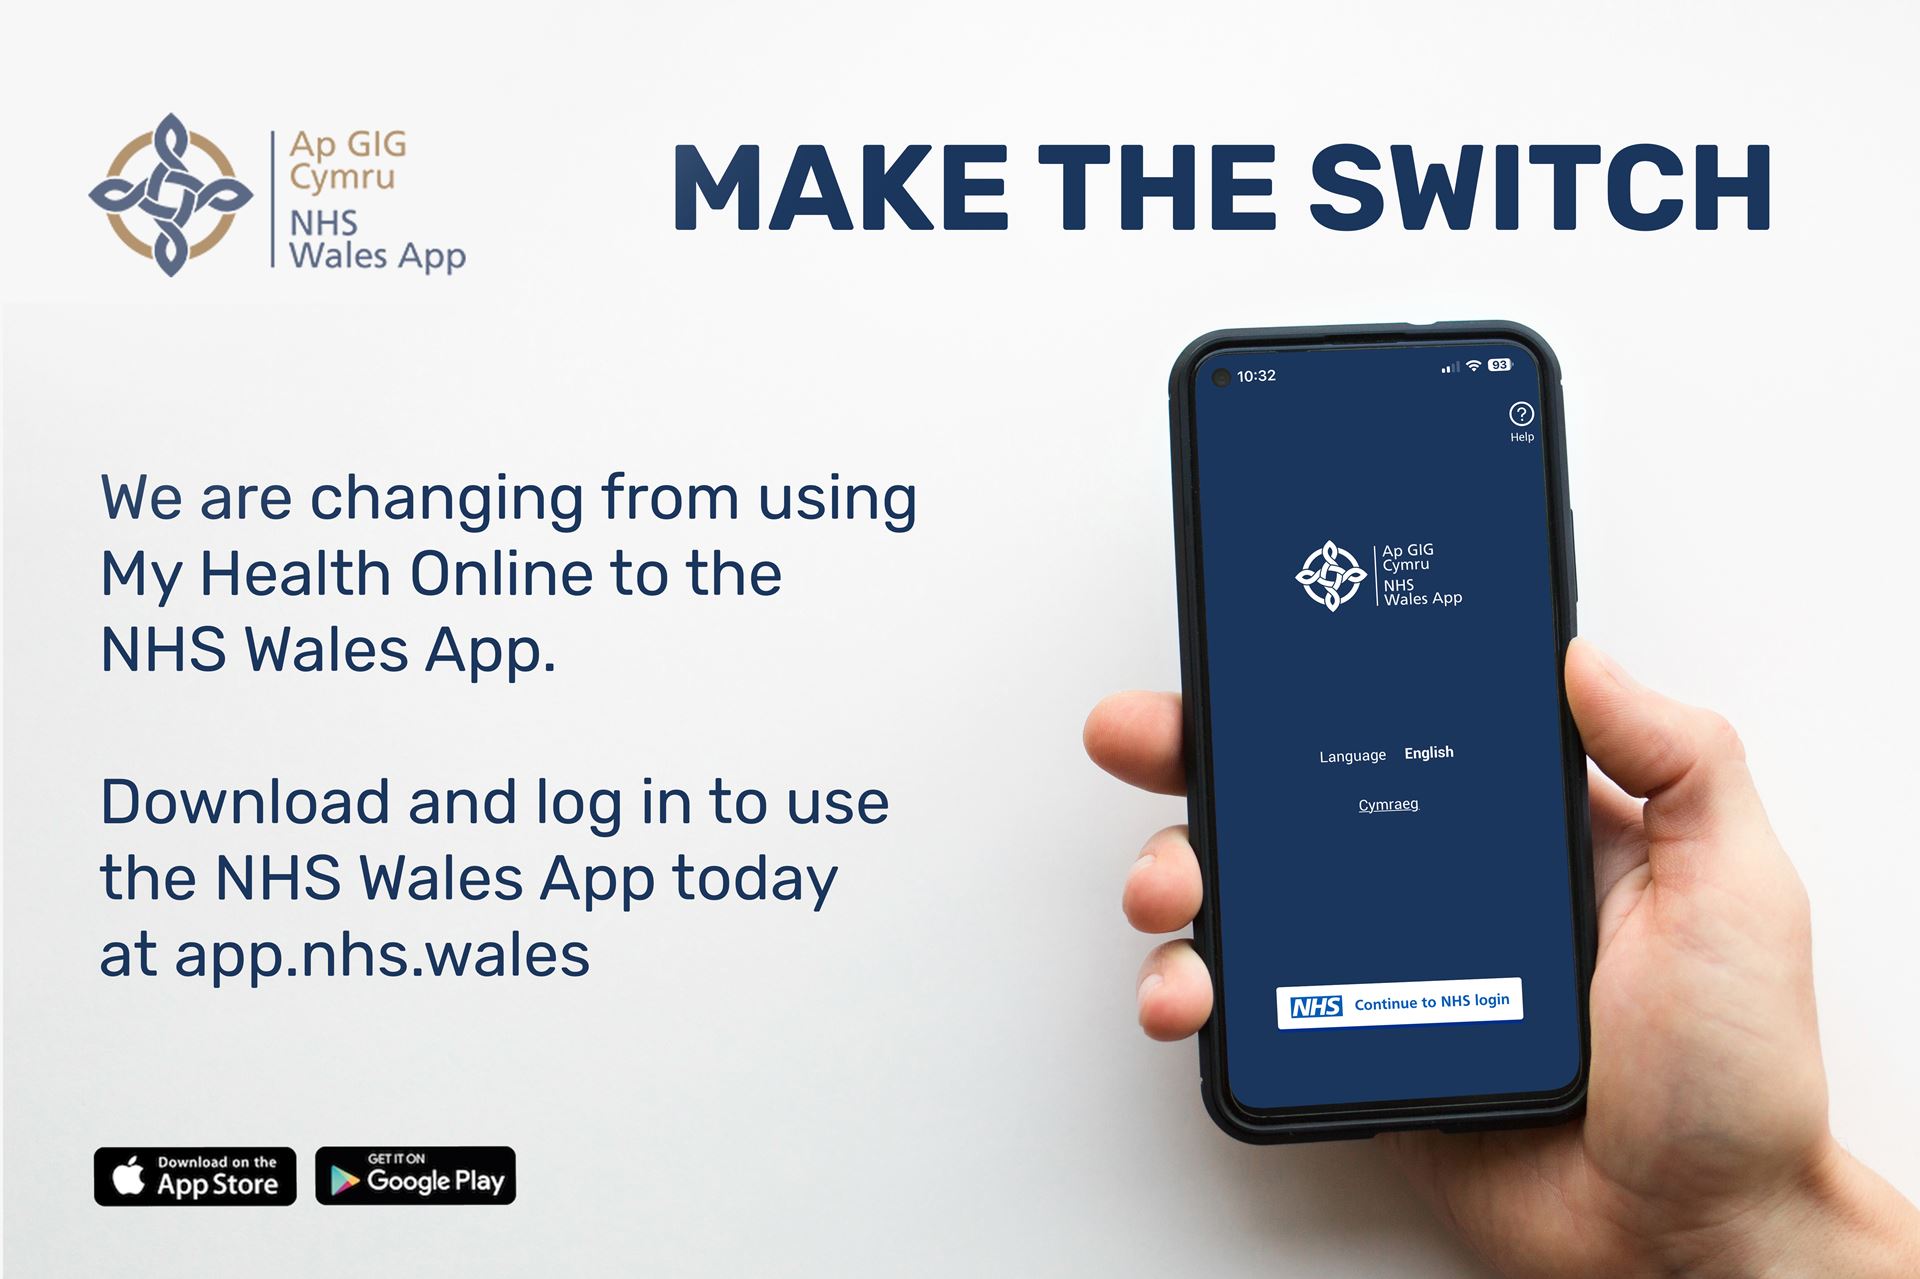 NHS wales app switch